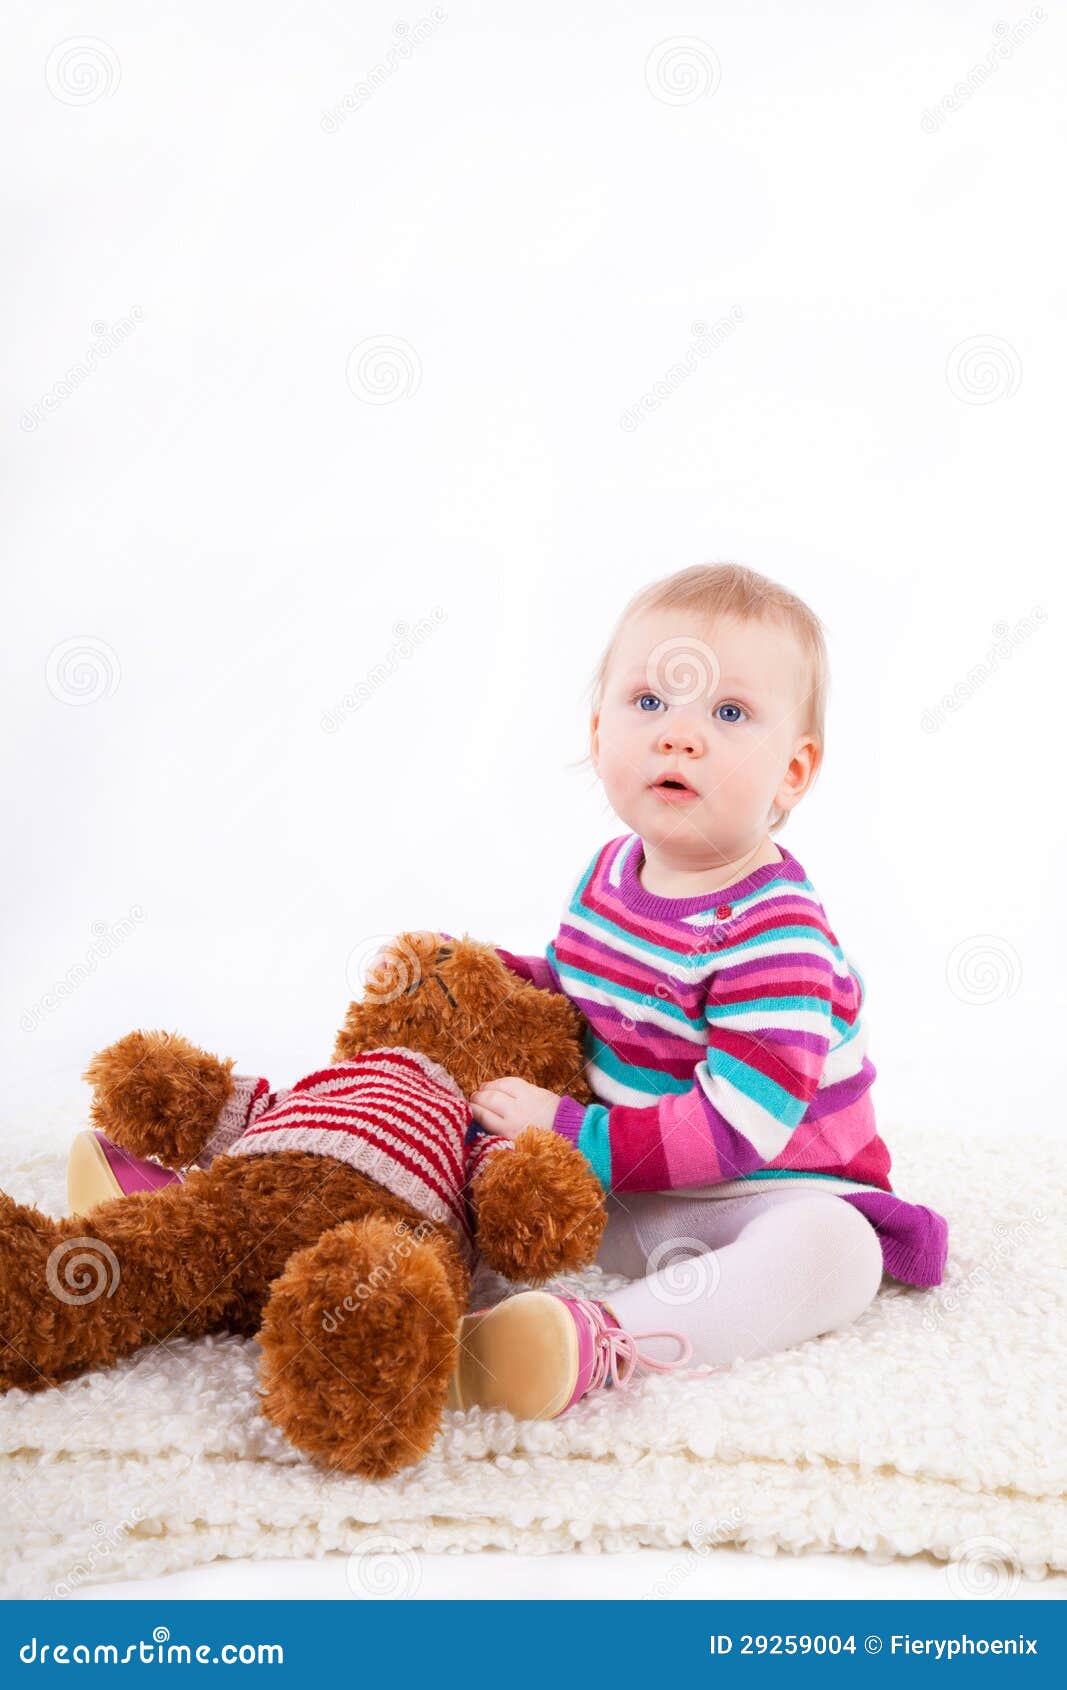 Small Red Hair Baby Girl Playing With Teddy Bear On White ...